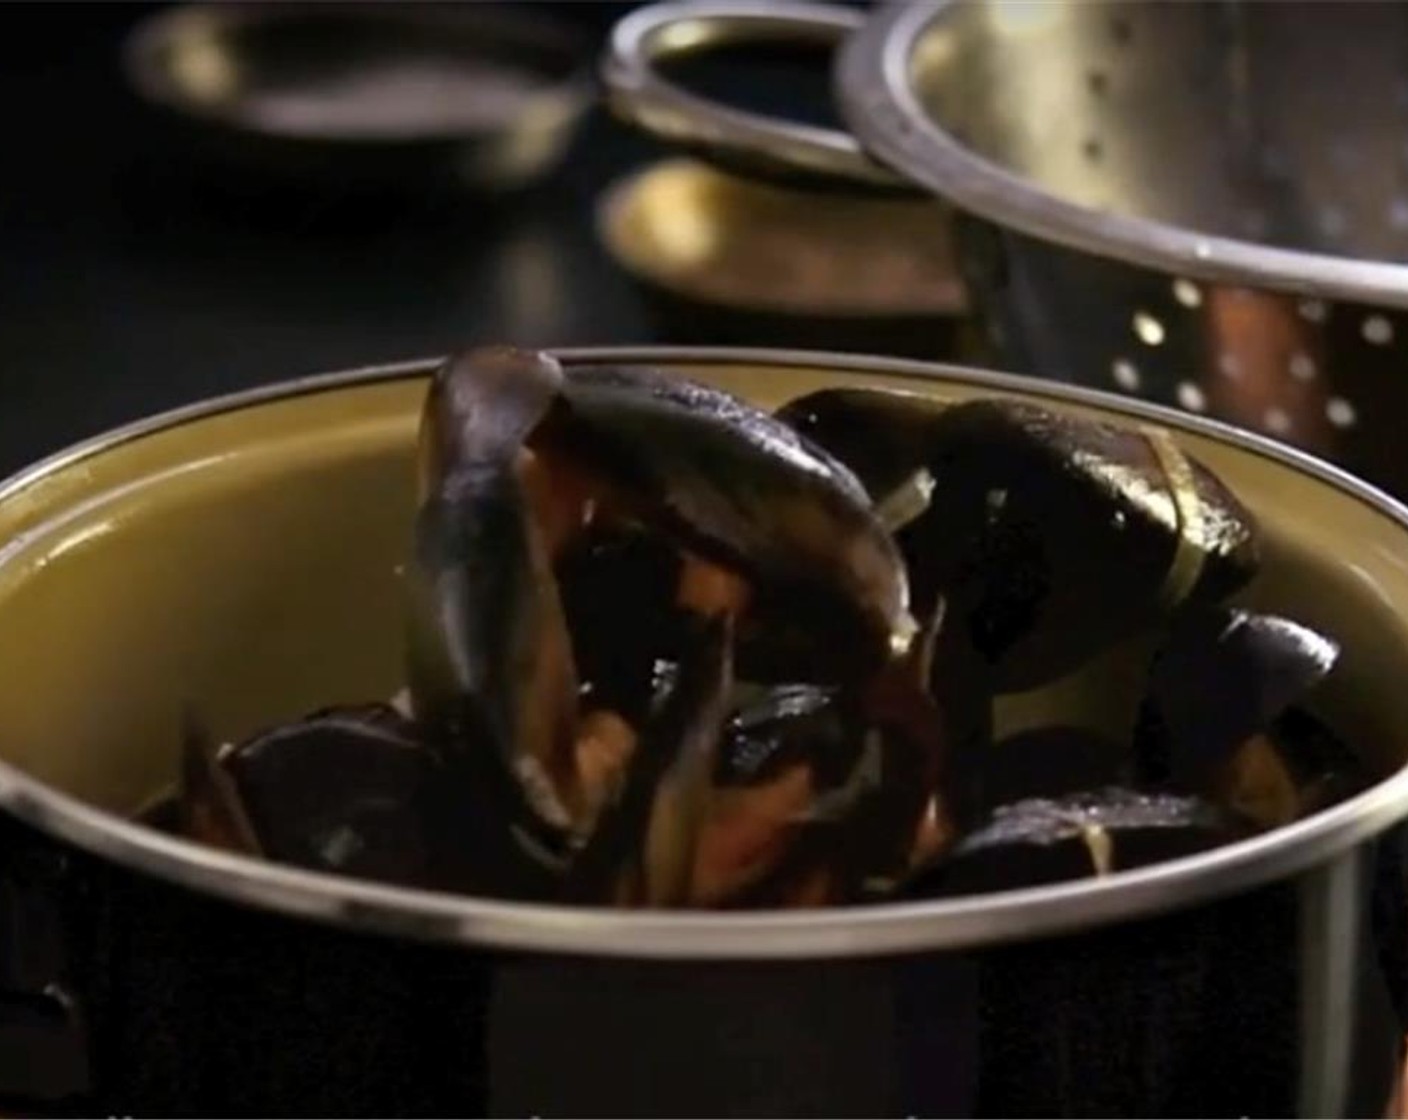 step 6 Either return mussels to the pot and cover to heat through, or pour sauce over mussels in serving bowls.